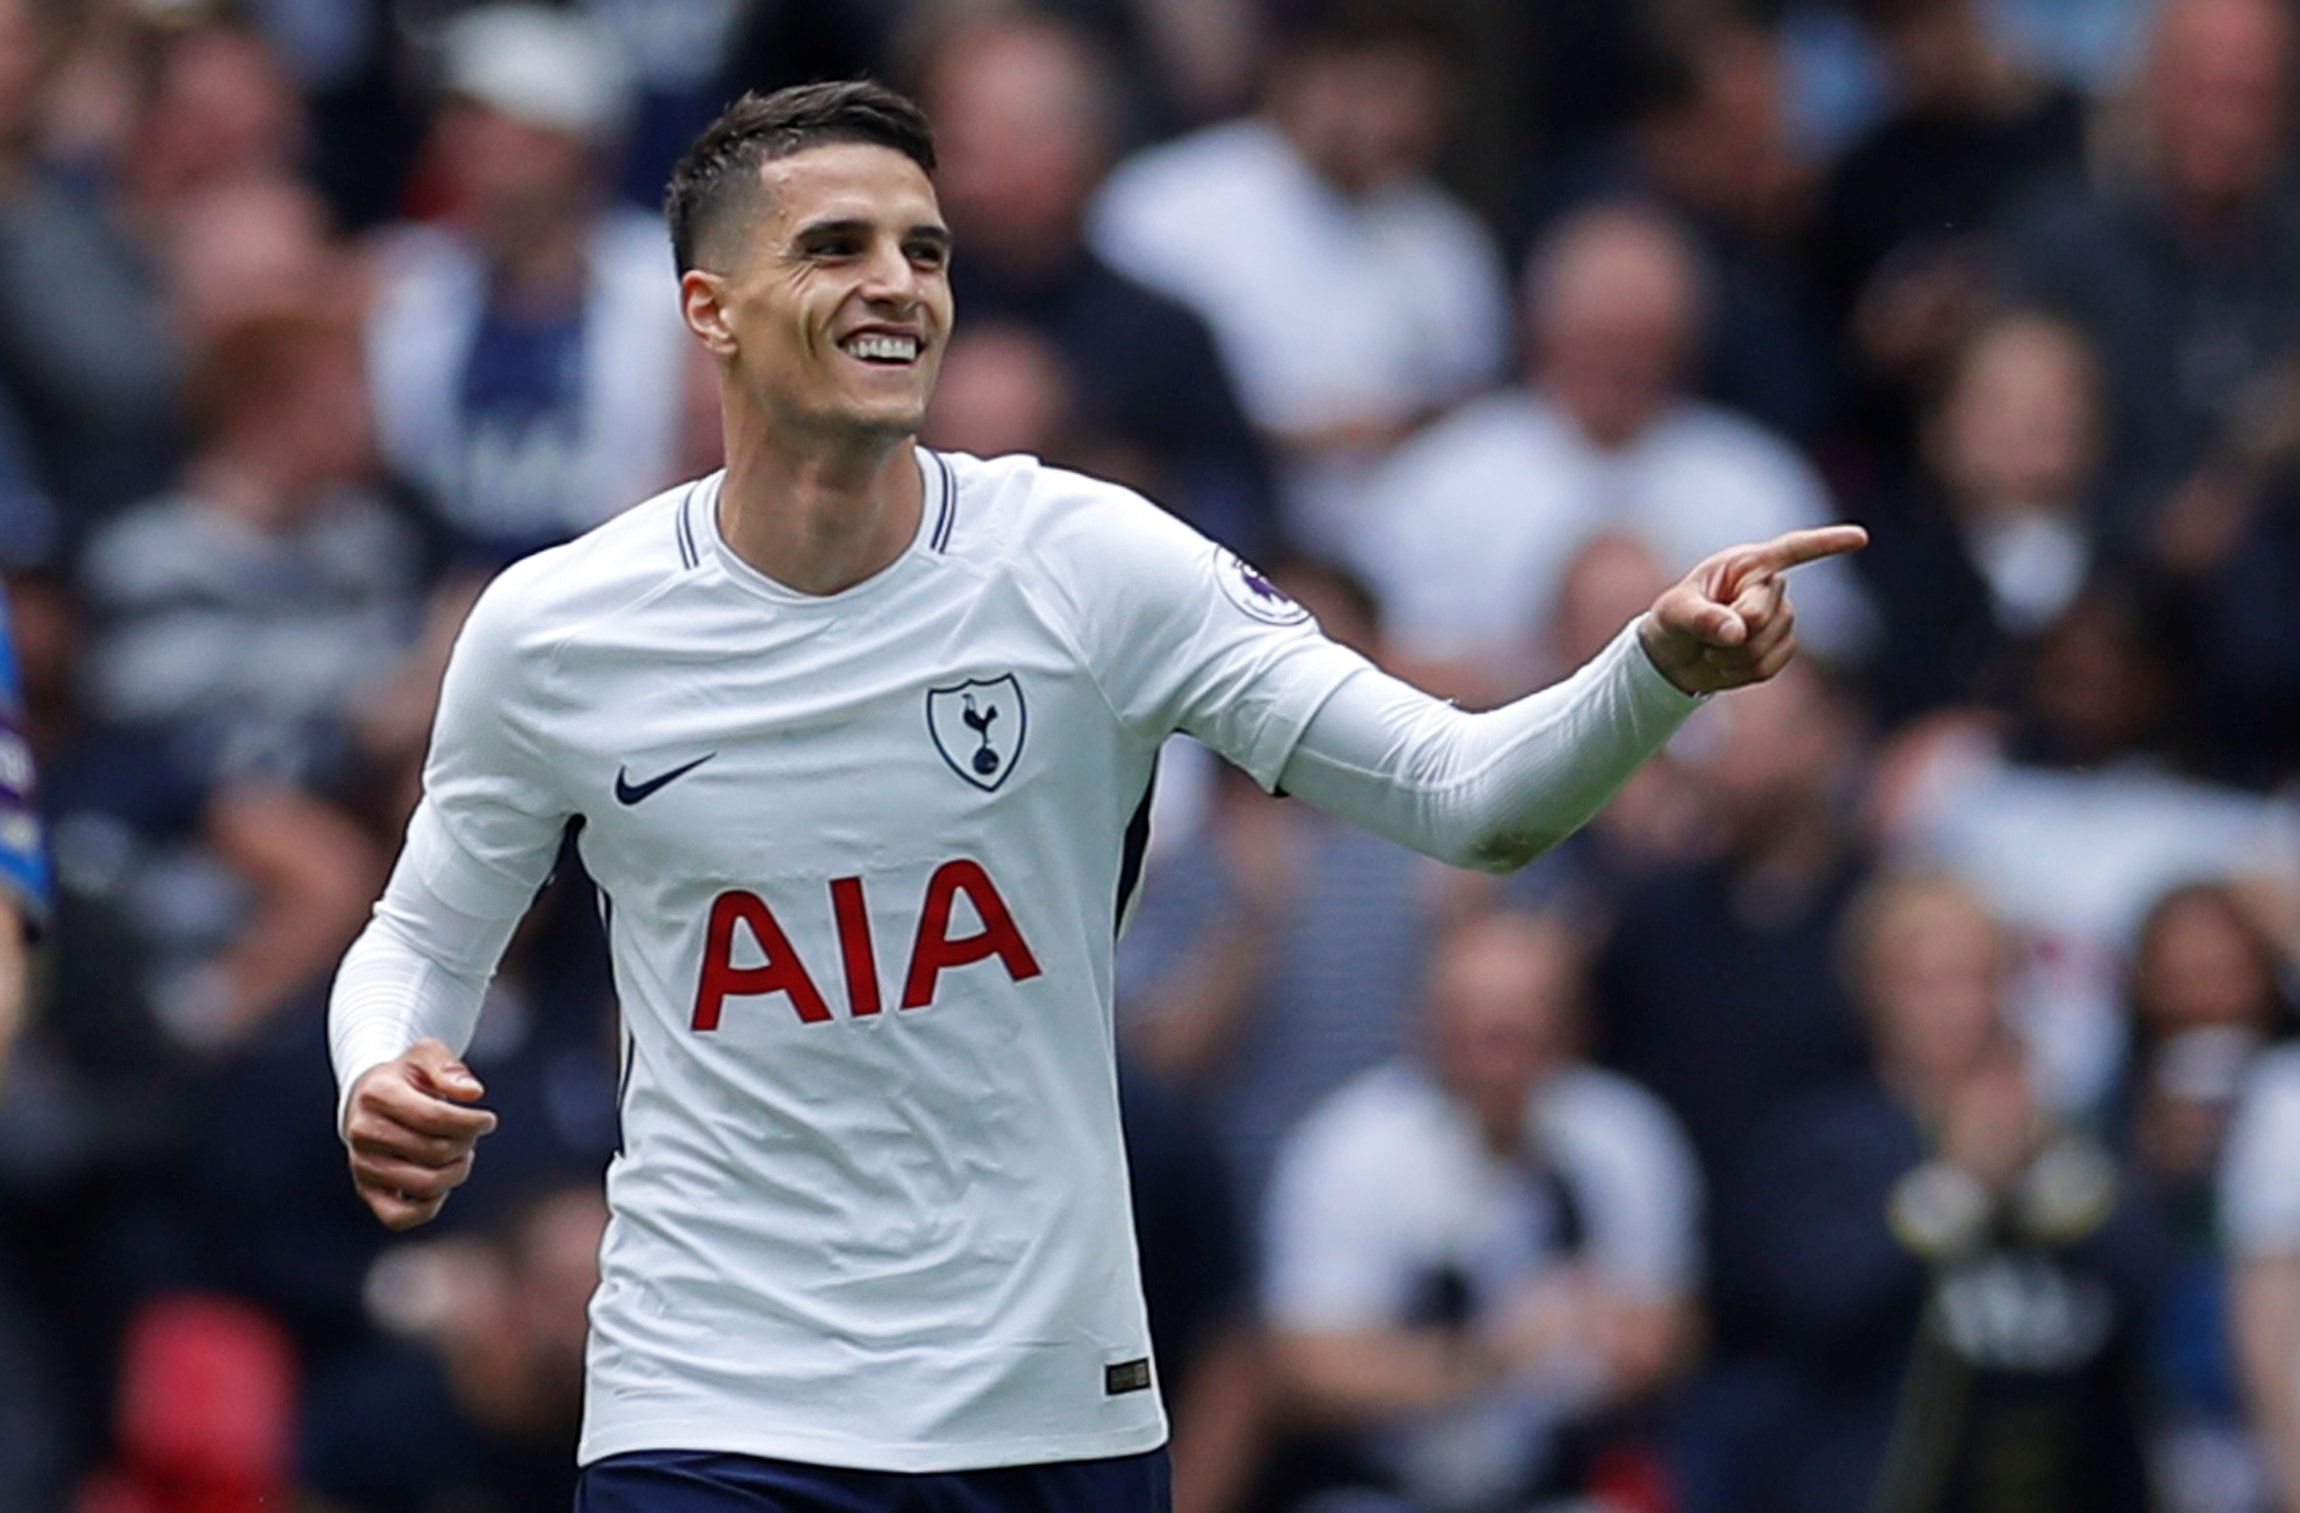 Soccer Football - Premier League - Tottenham Hotspur vs Leicester City - Wembley Stadium, London, Britain - May 13, 2018   Tottenham's Erik Lamela celebrates scoring their fourth goal    Action Images via Reuters/Andrew Couldridge    EDITORIAL USE ONLY. No use with unauthorized audio, video, data, fixture lists, club/league logos or 